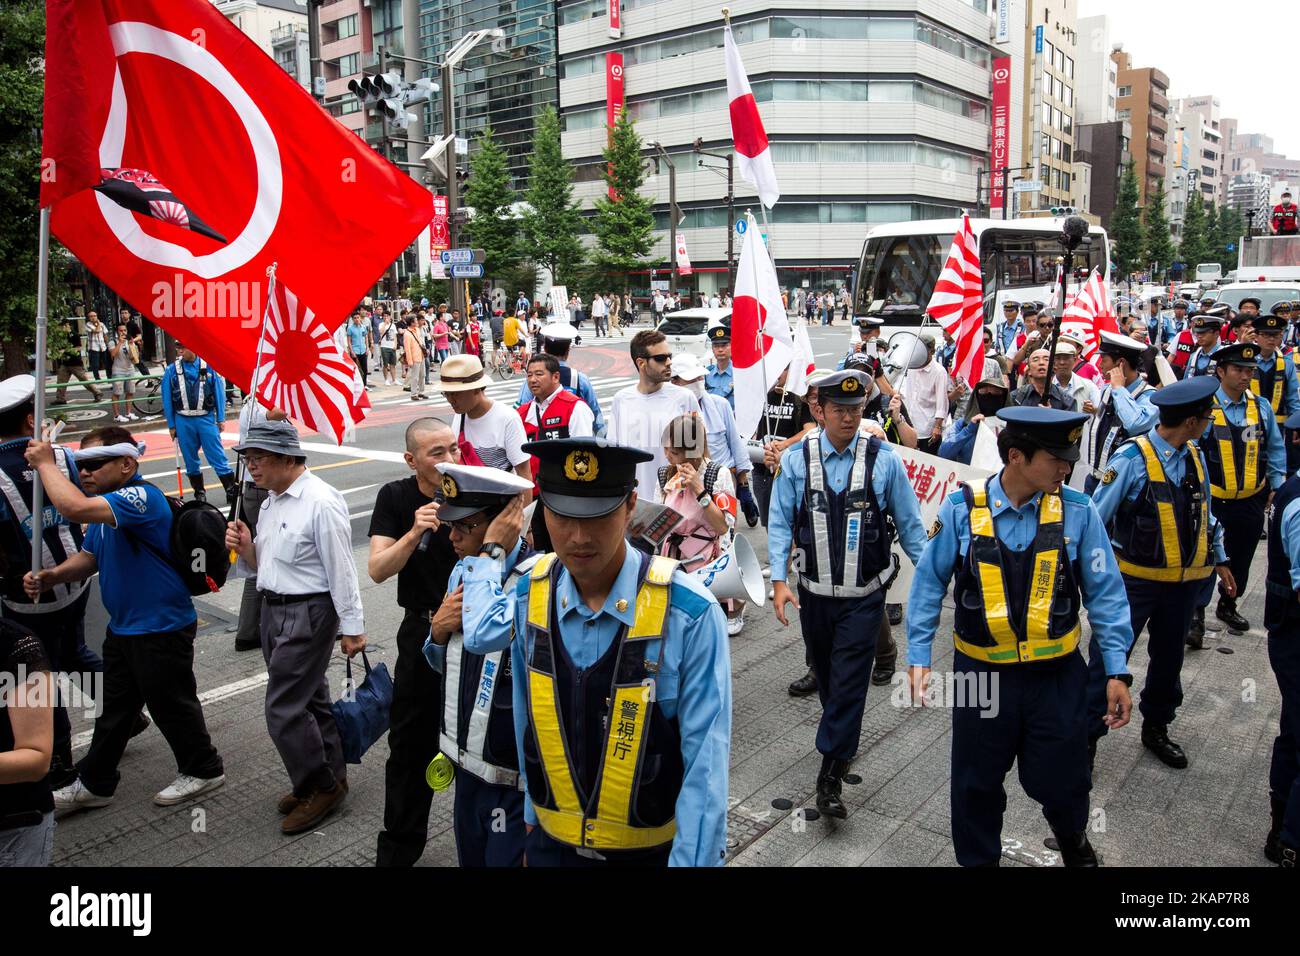 Japanese nationalists holding Japanese flags took to the streets in a 'hate demonstration' in Akihabara, Tokyo, Japan on July 16, 2017. The nationalists faced off with anti-racist groups who mounted counter protests demanding an end to hate speech and racism in Japan. (Photo by Richard Atrero de Guzman/NUR Photo) *** Please Use Credit from Credit Field *** Stock Photo